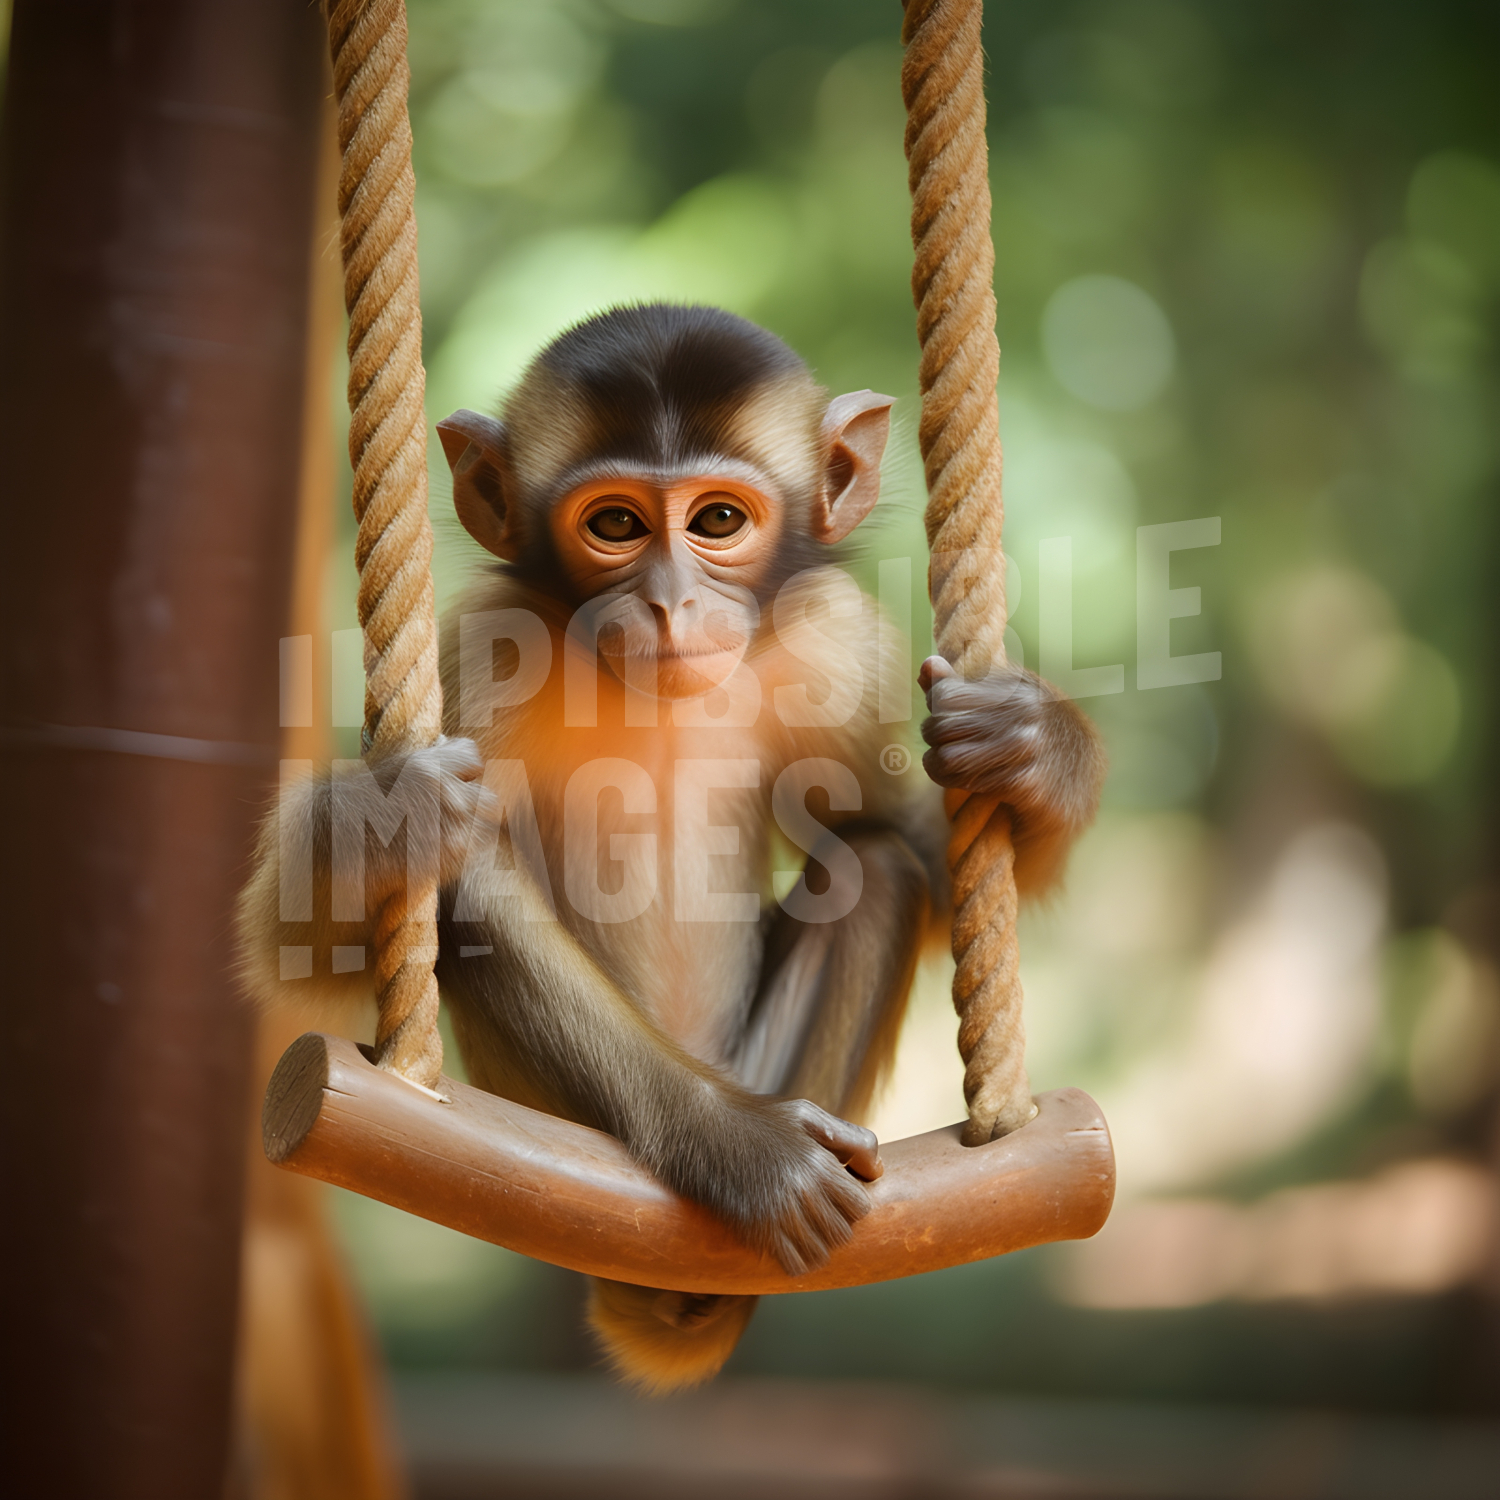 A small monkey is sitting on a rope